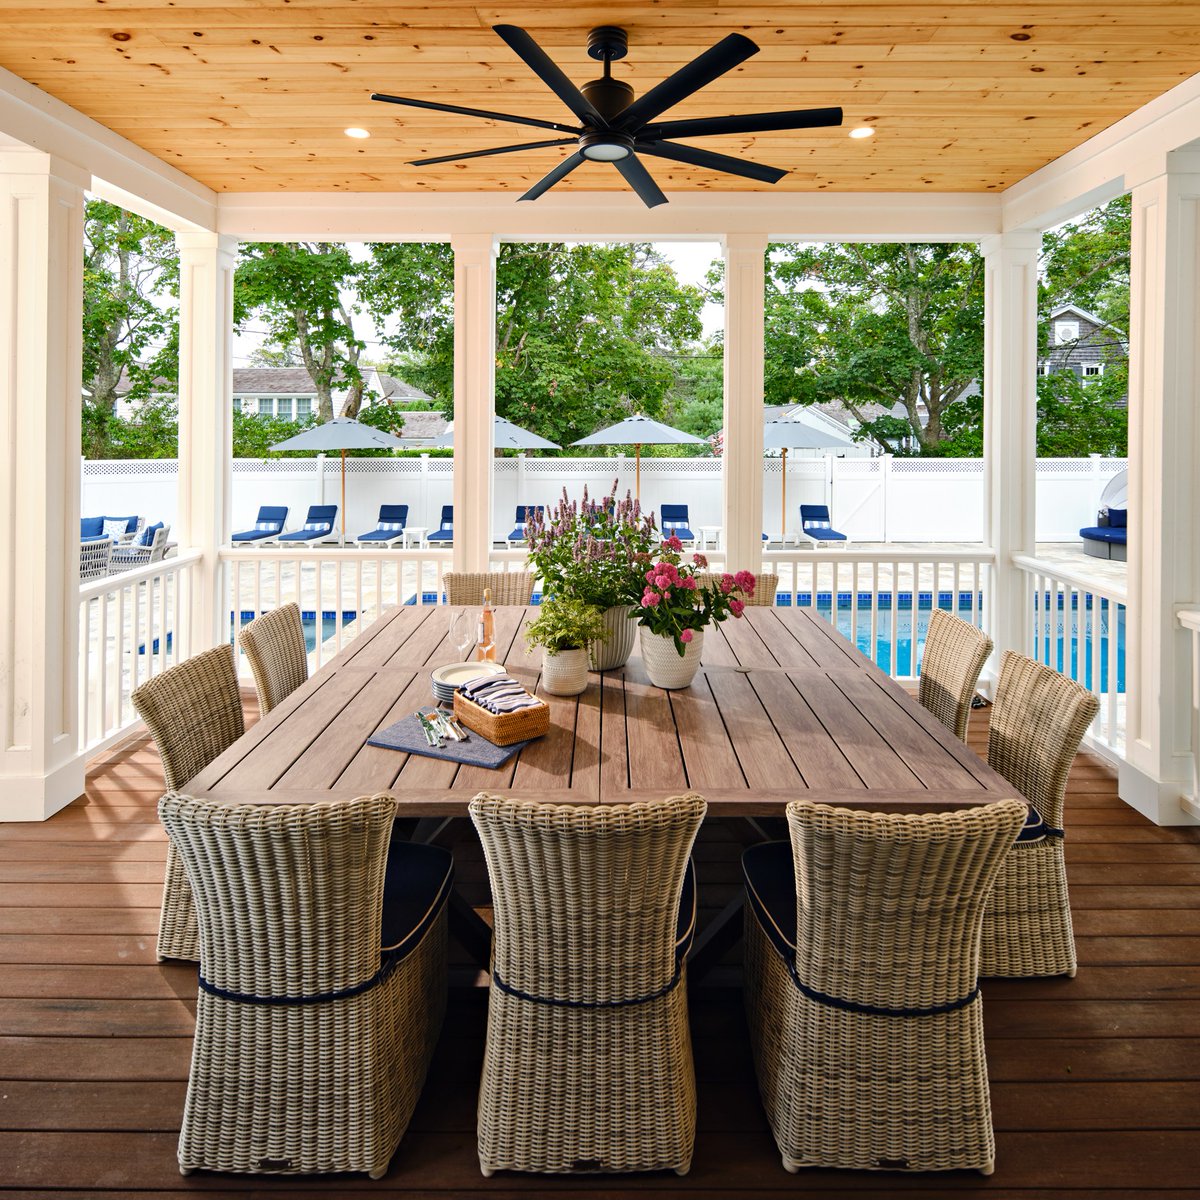 We design our clients’ outdoor spaces with as much care as we do their indoor spaces.
#ERTADesigned #LifeWellDesigned #FarmersPorch #IndoorOutdoorLiving #OutdoorLiving #ChathamMA #LuxuryHomes #NewEnglandArchitect